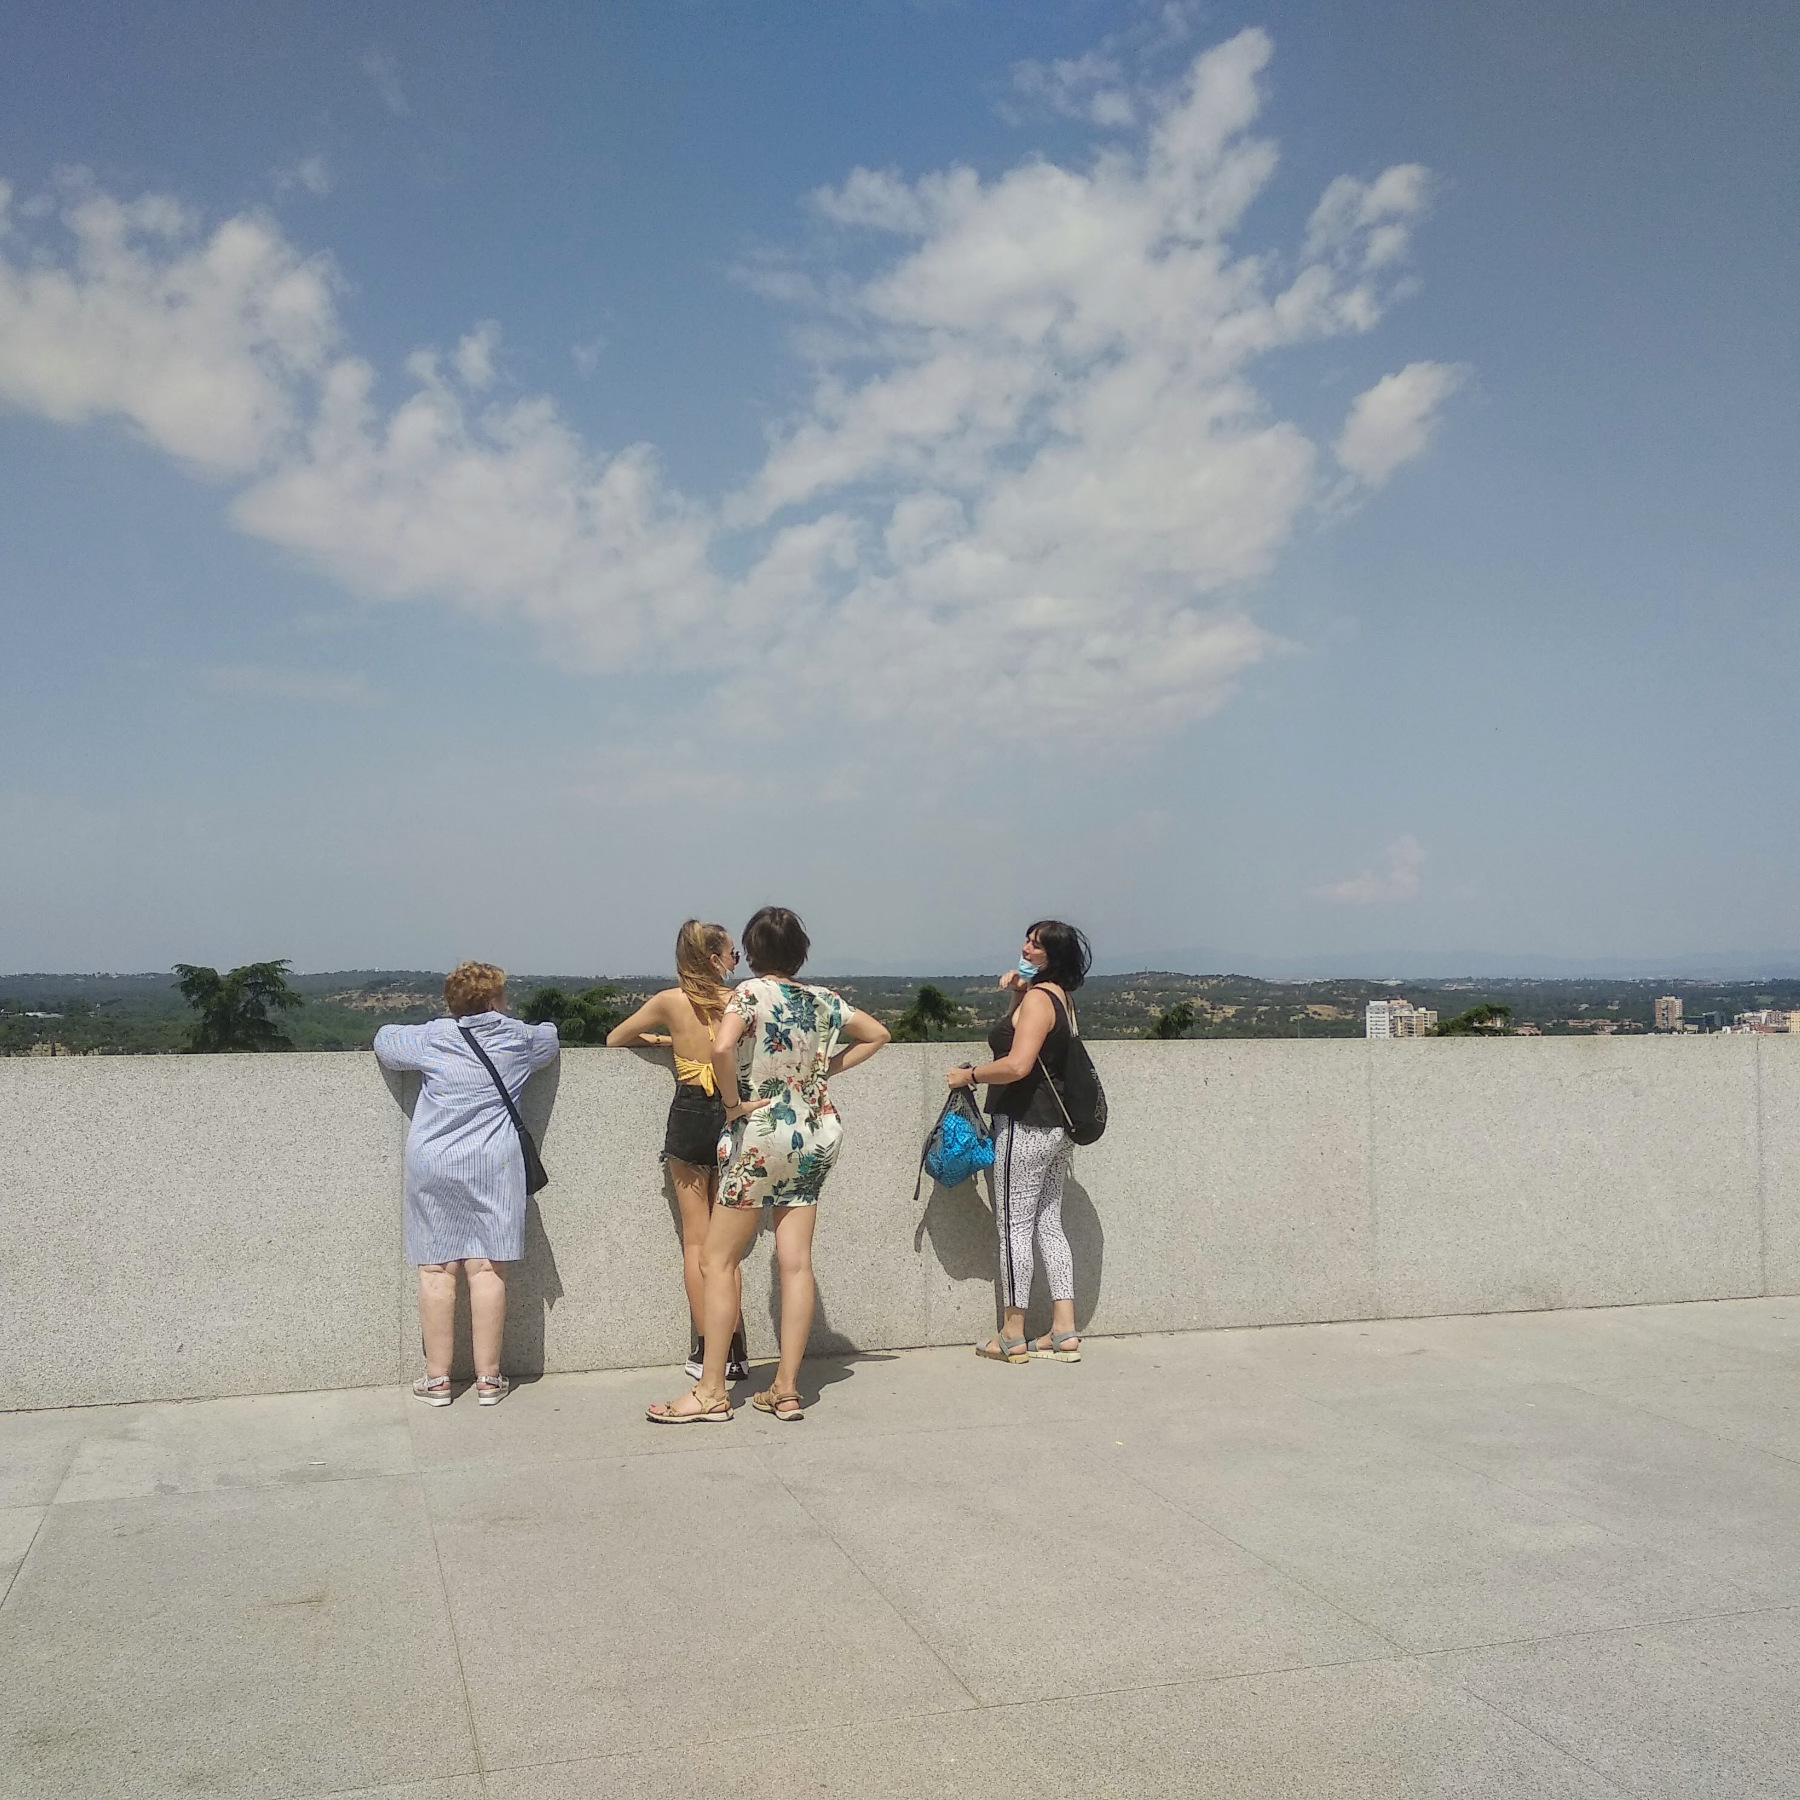 Tourists looking at views of the Guadarrama mountains from Madrid's new observation deck